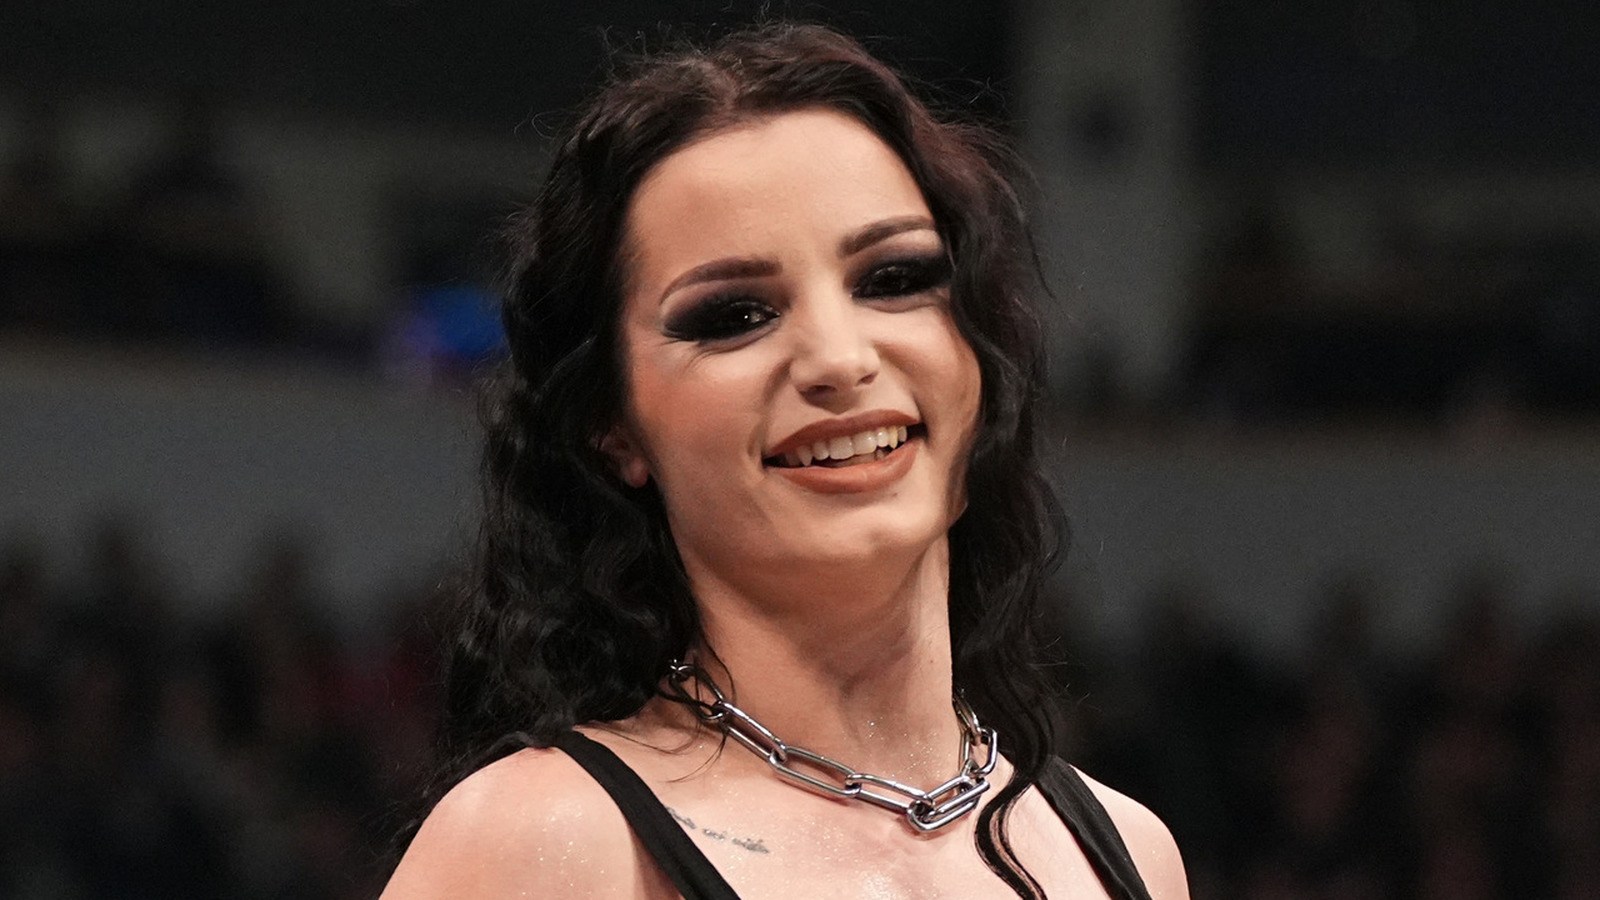 Saraya Announces Brother Zak Knight Has Signed With AEW In Backstage Rampage Segment